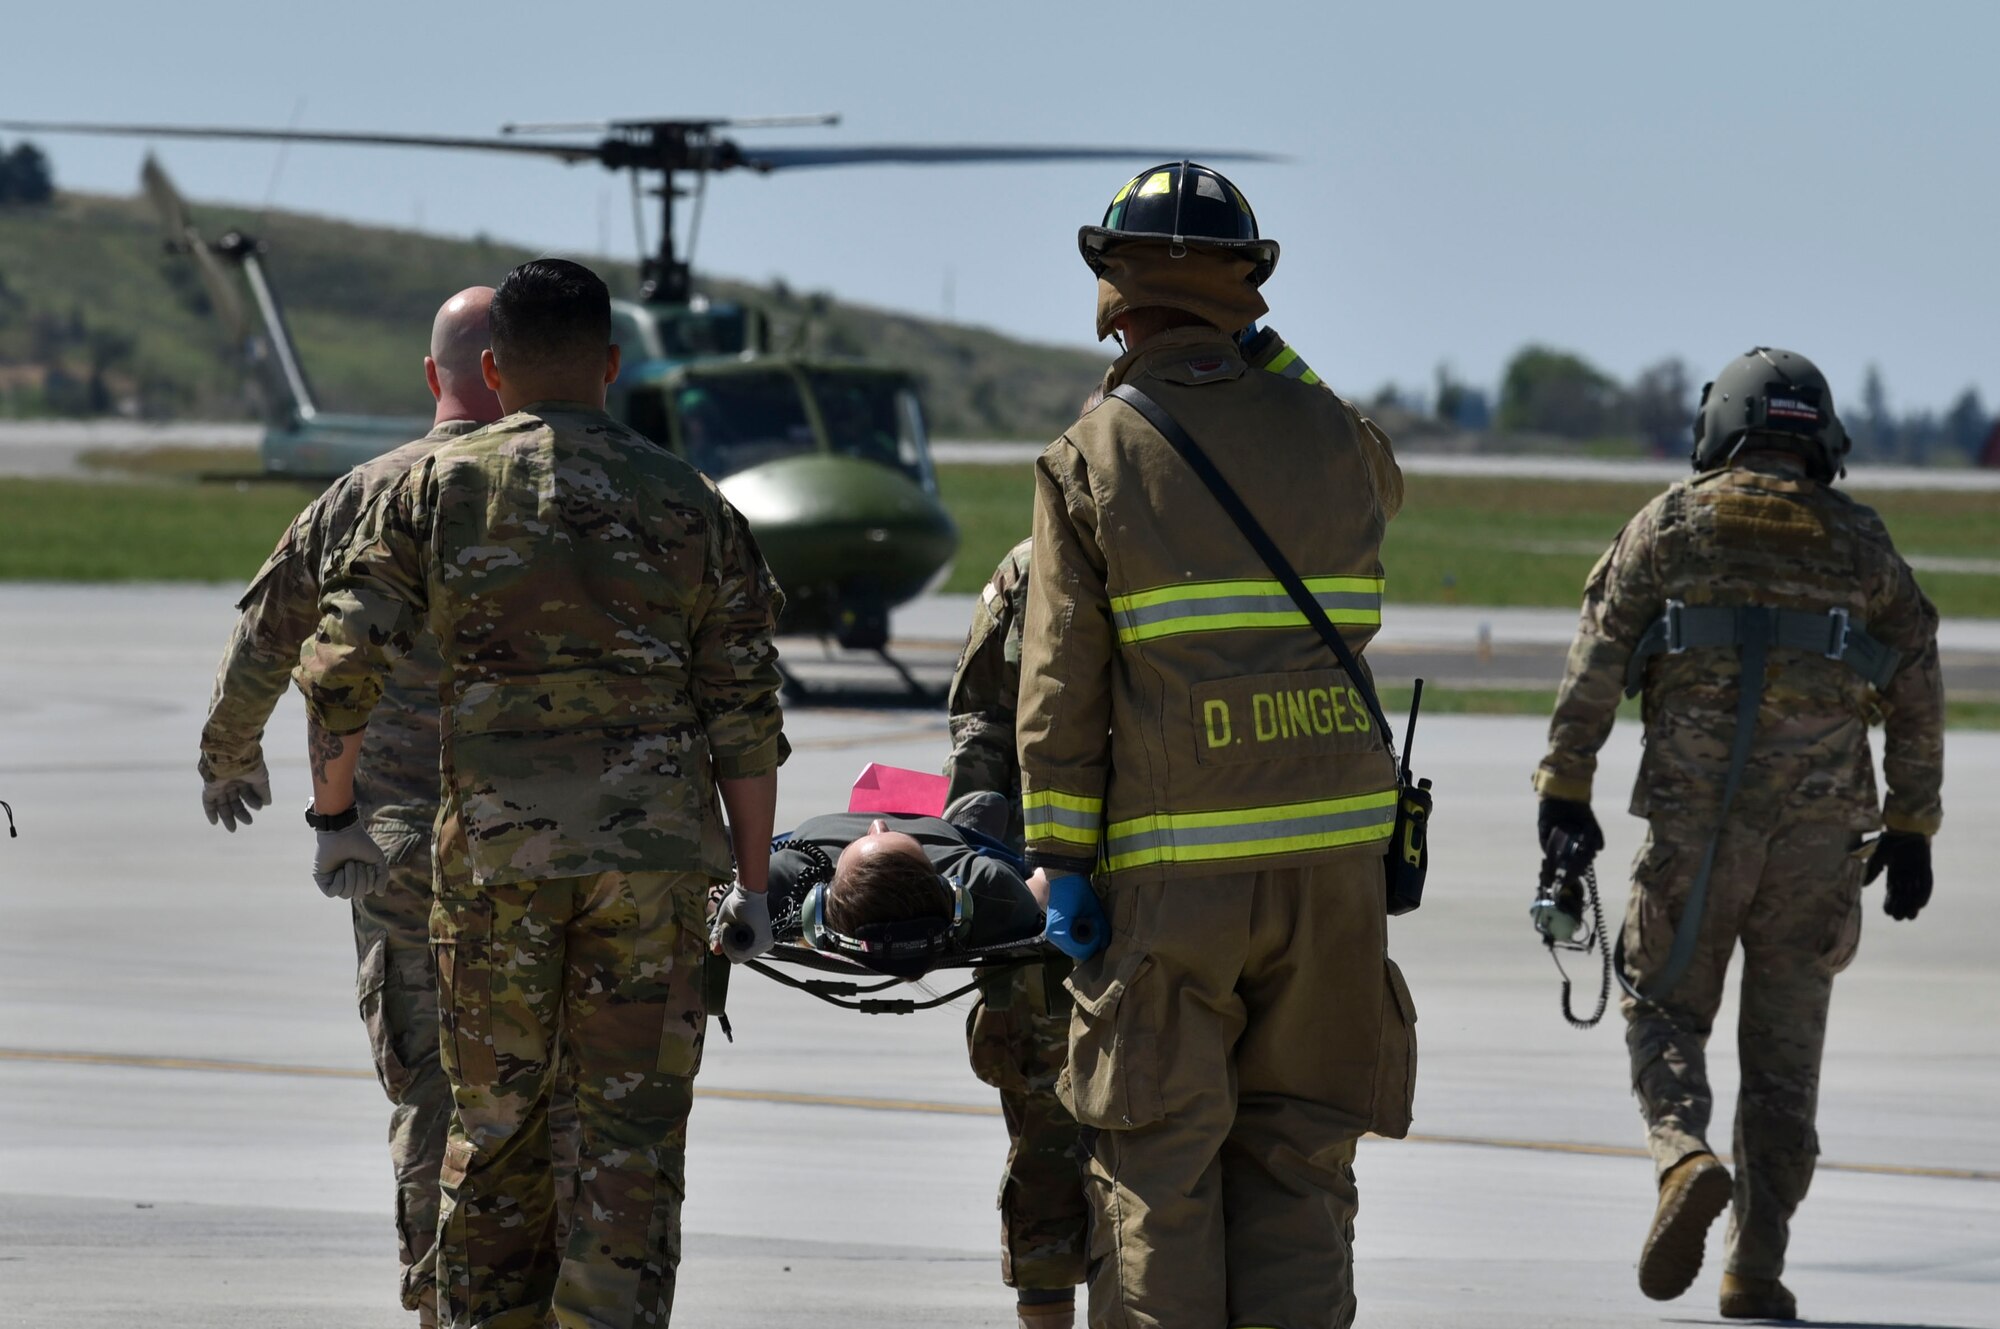 A Fairchild medical response team carries a fellow airman role-playing as an injured bystander during the Major Action Response Exercise at Fairchild Air Force Base, Washington, May 9, 2019.